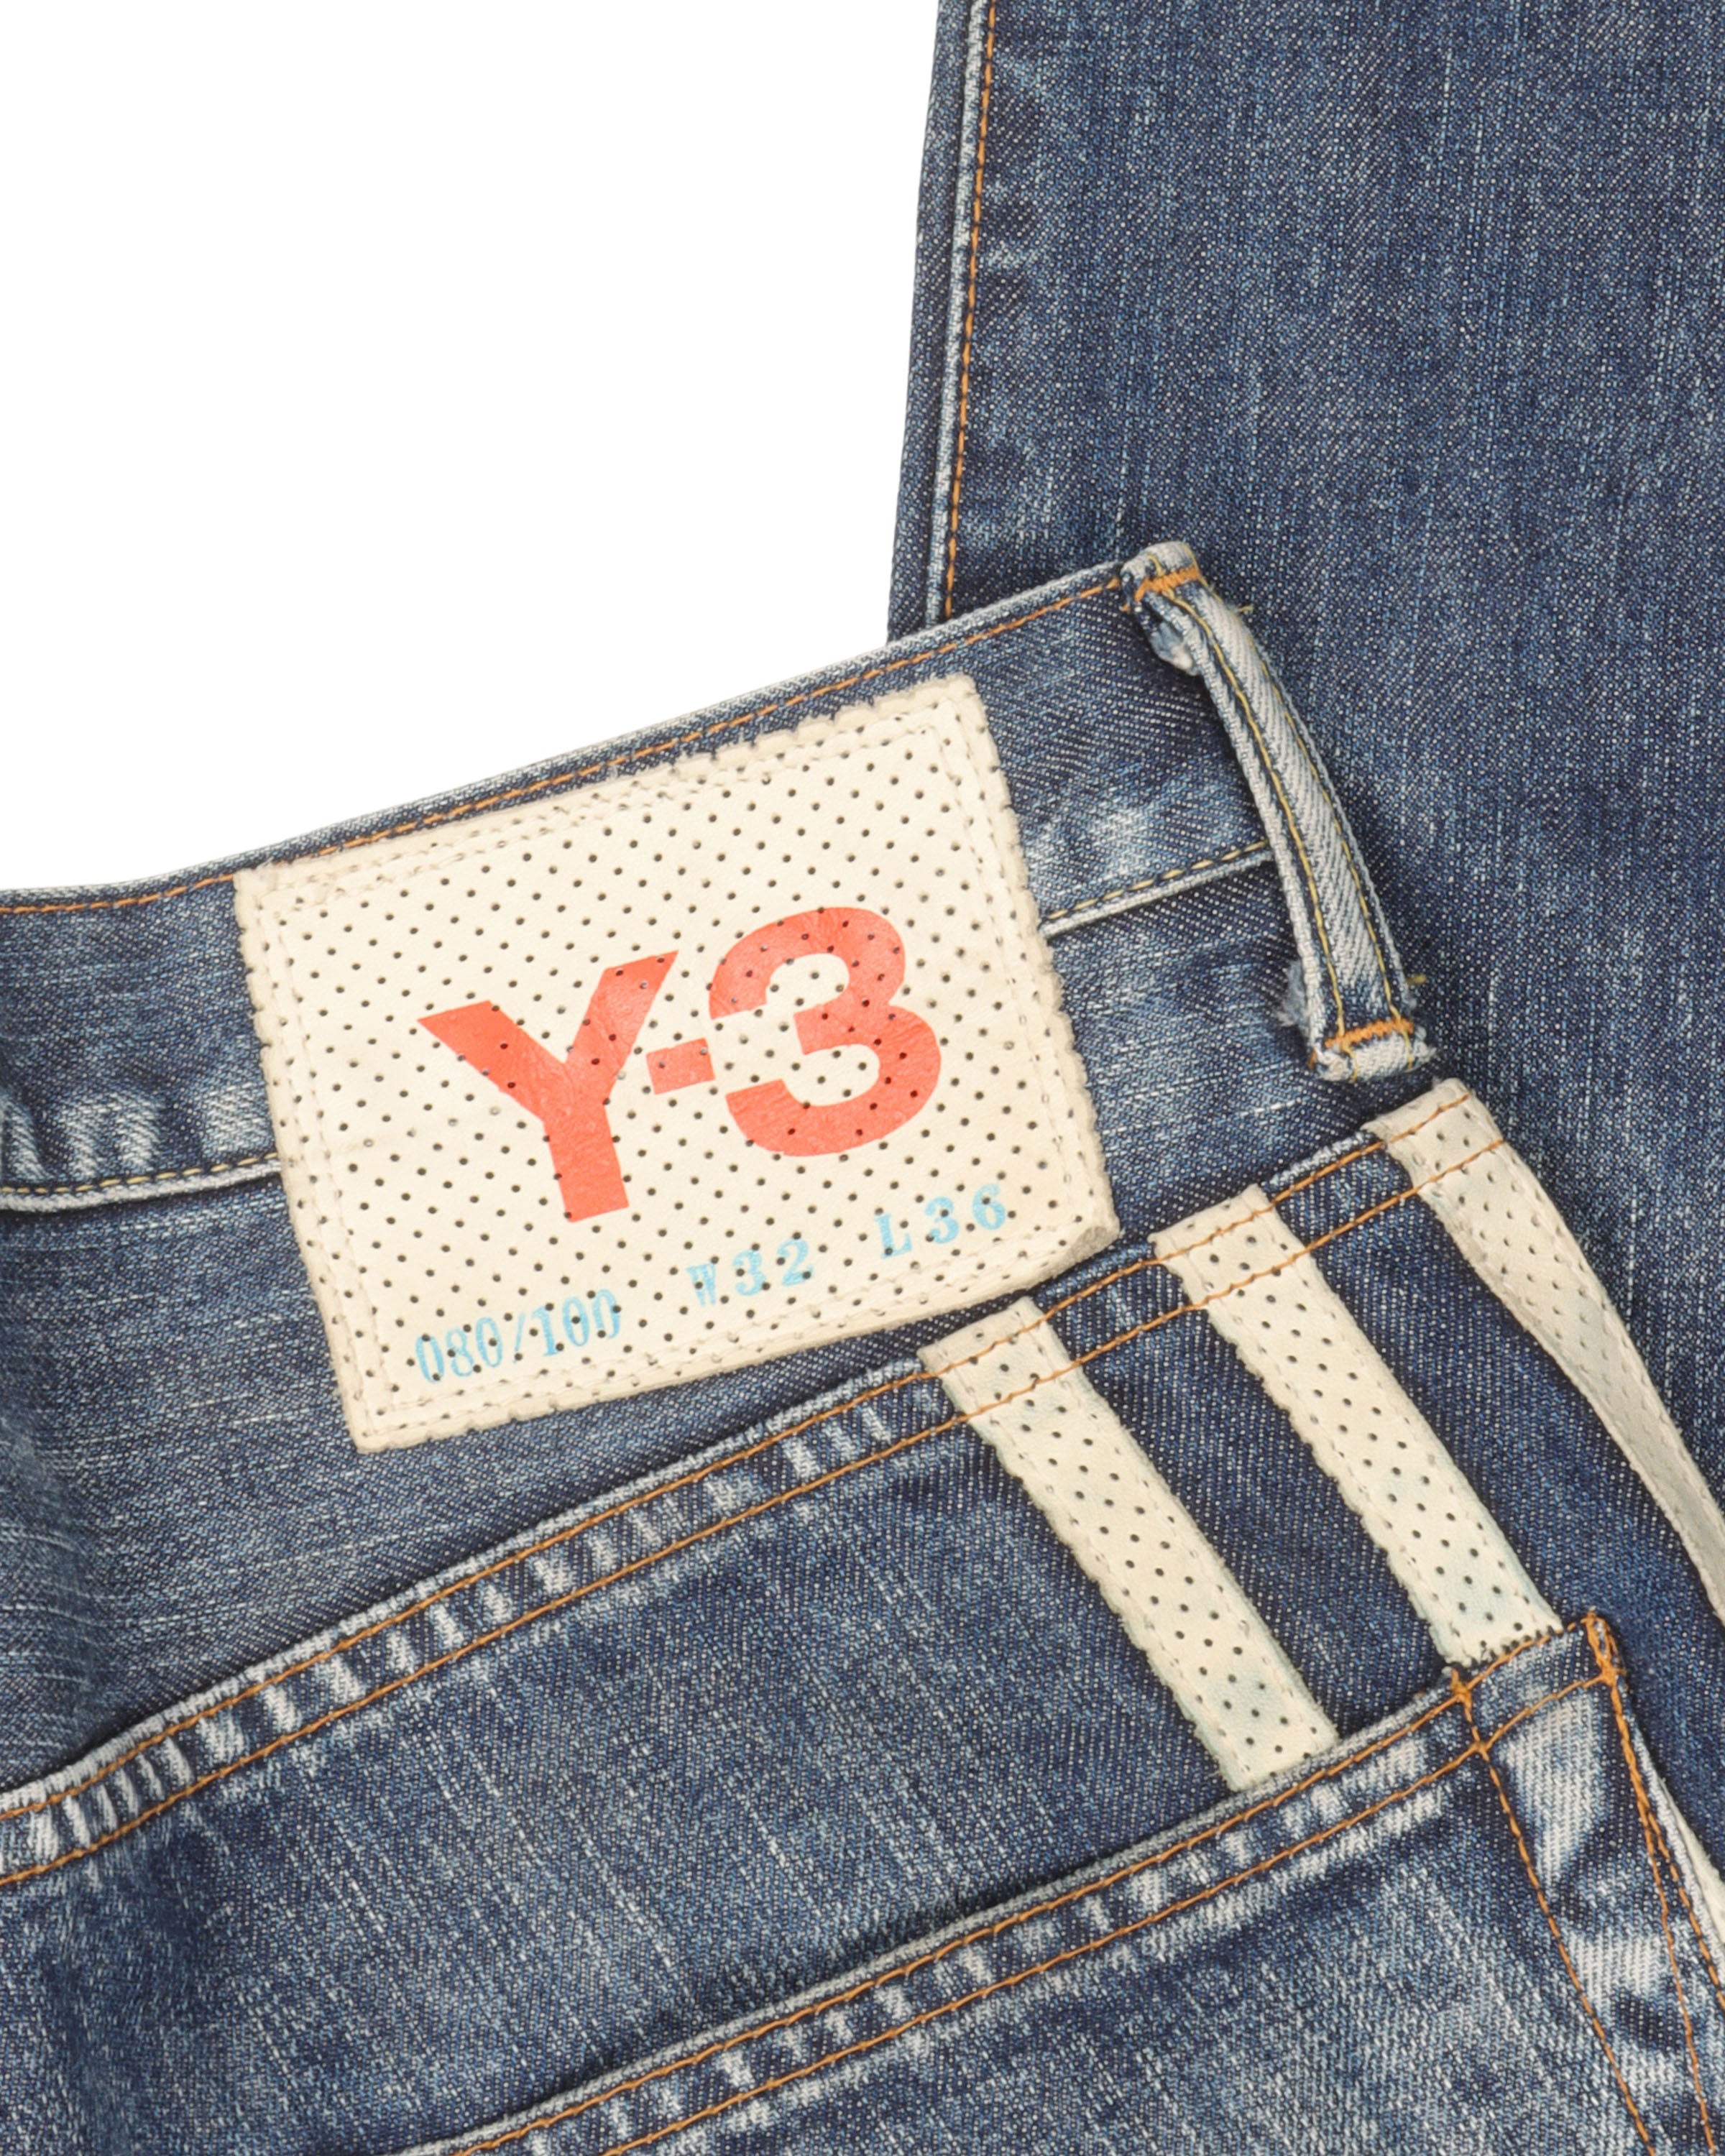 AW04 Spotted Horse Y-3 Adidas Striped Jeans 80/100